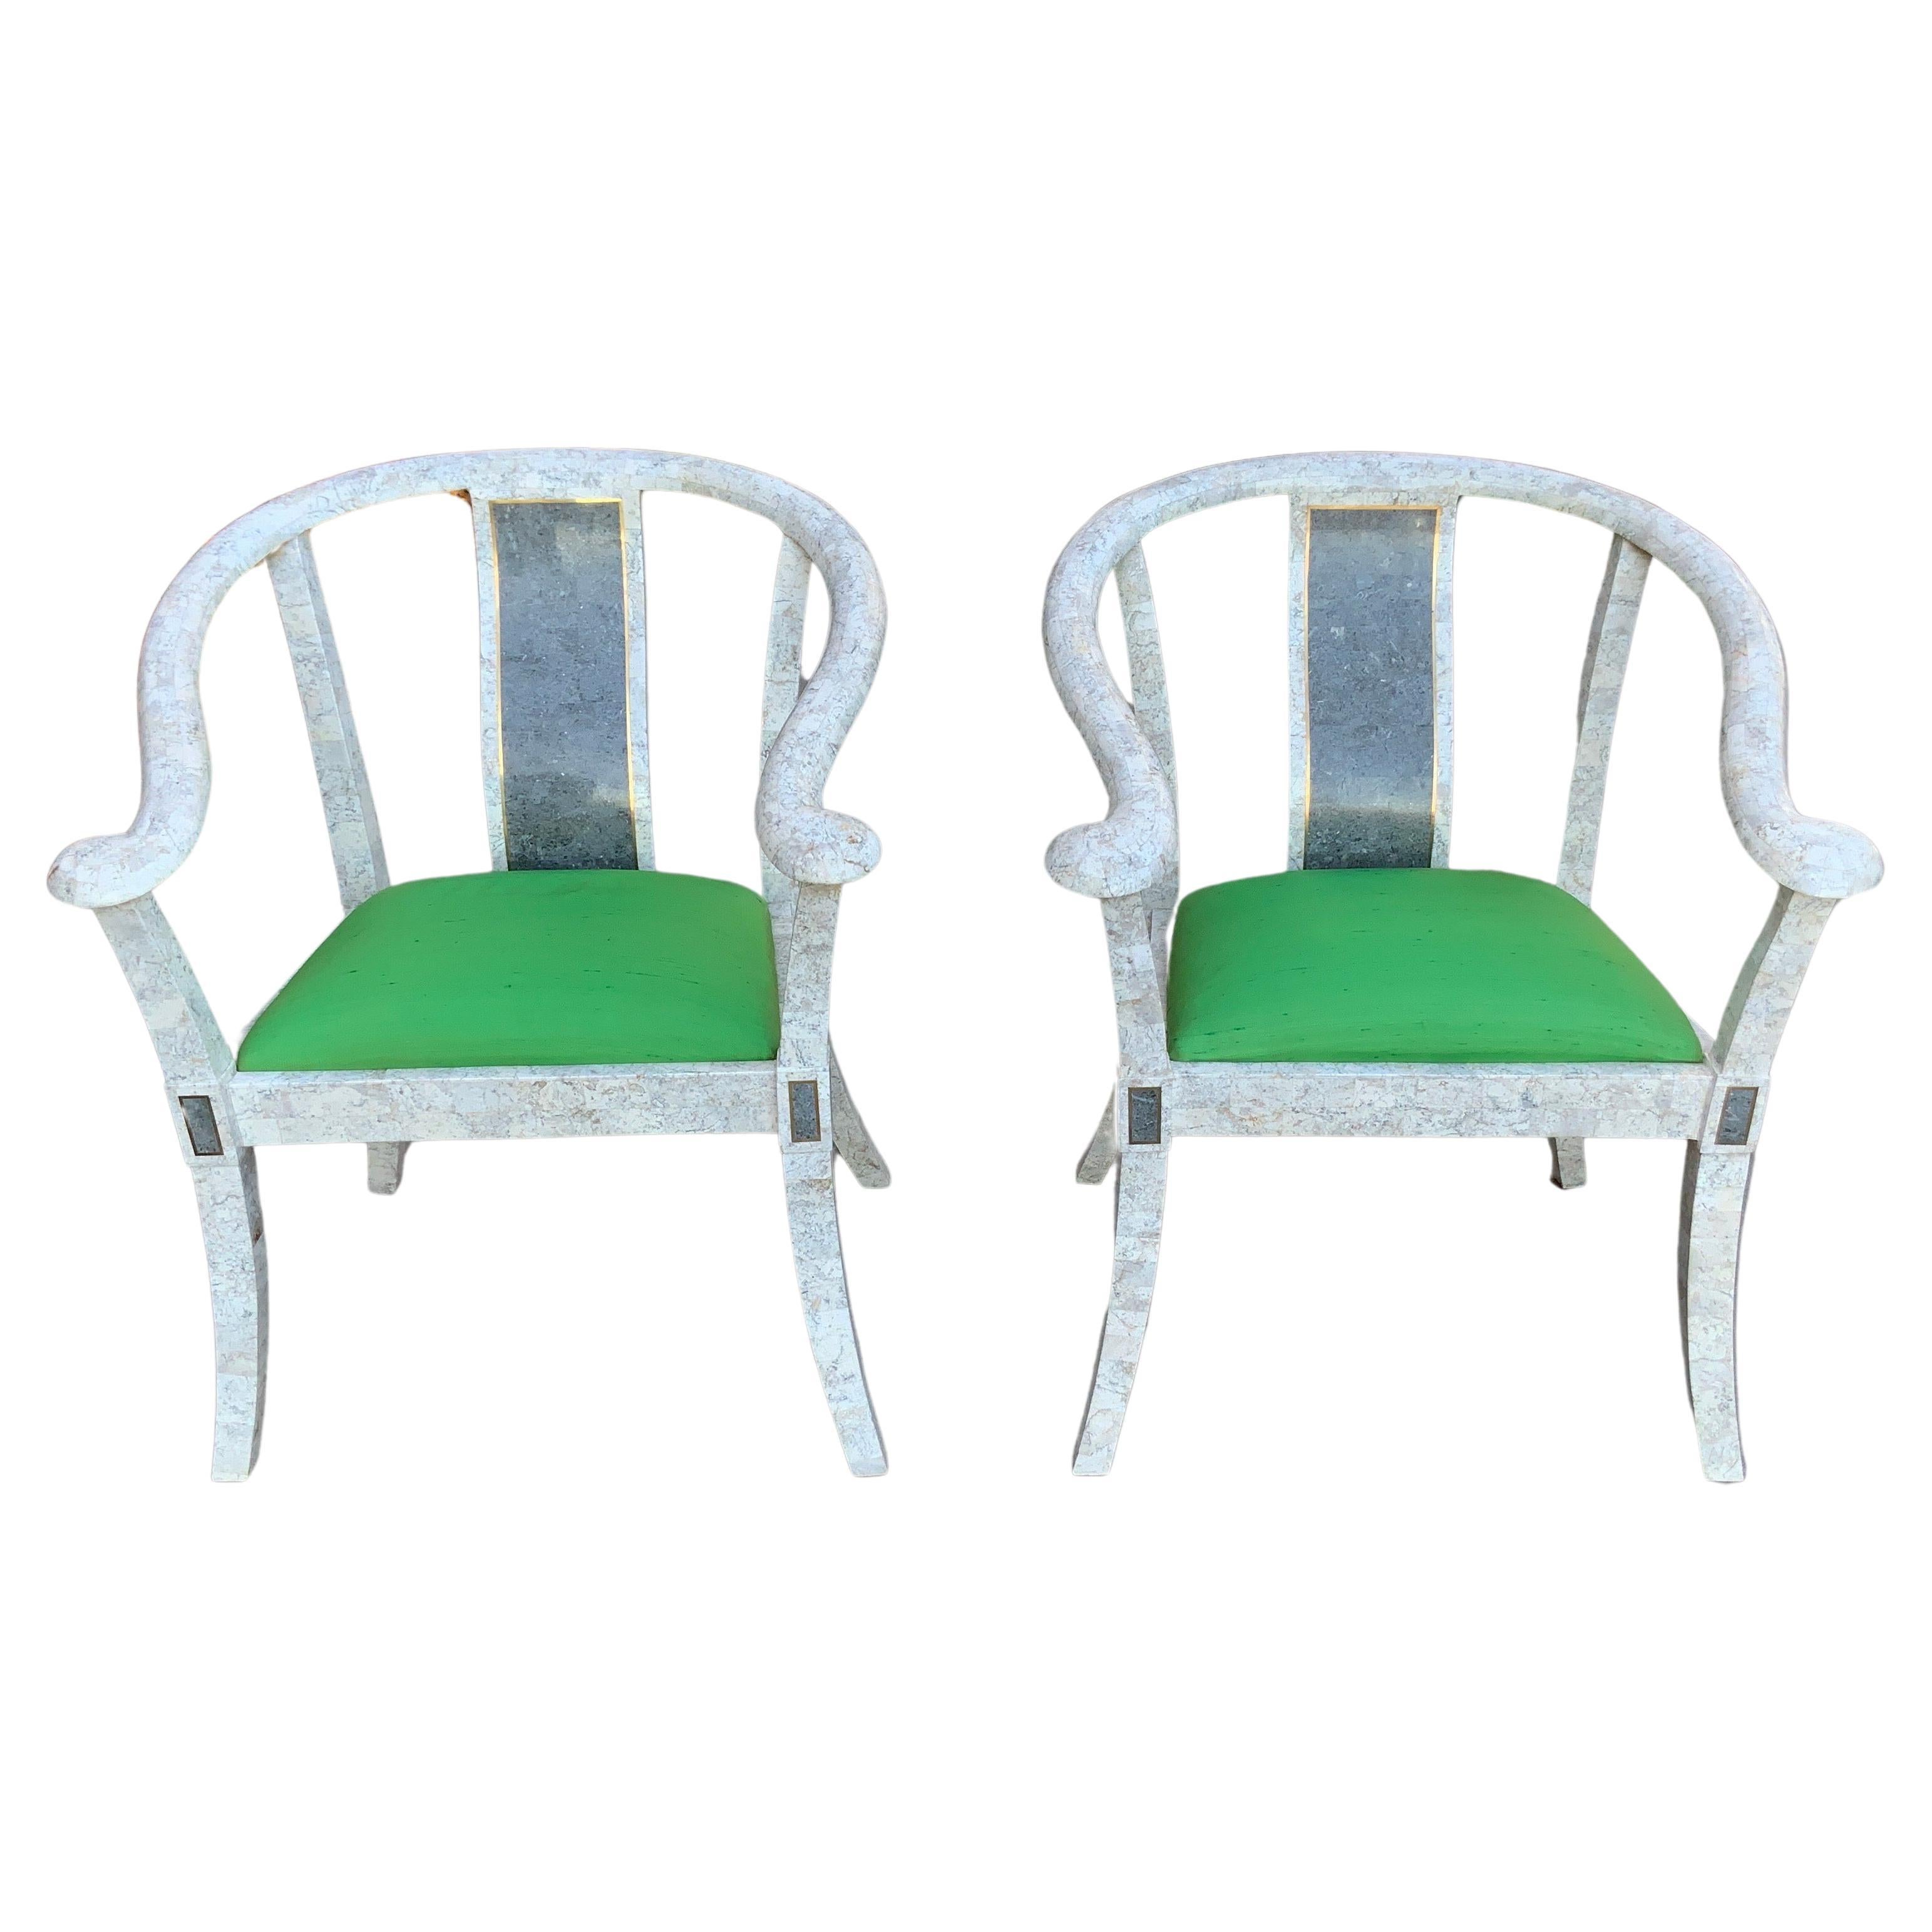 Pair of Maitland Smith Tessellated Stone Ming Chairs For Sale